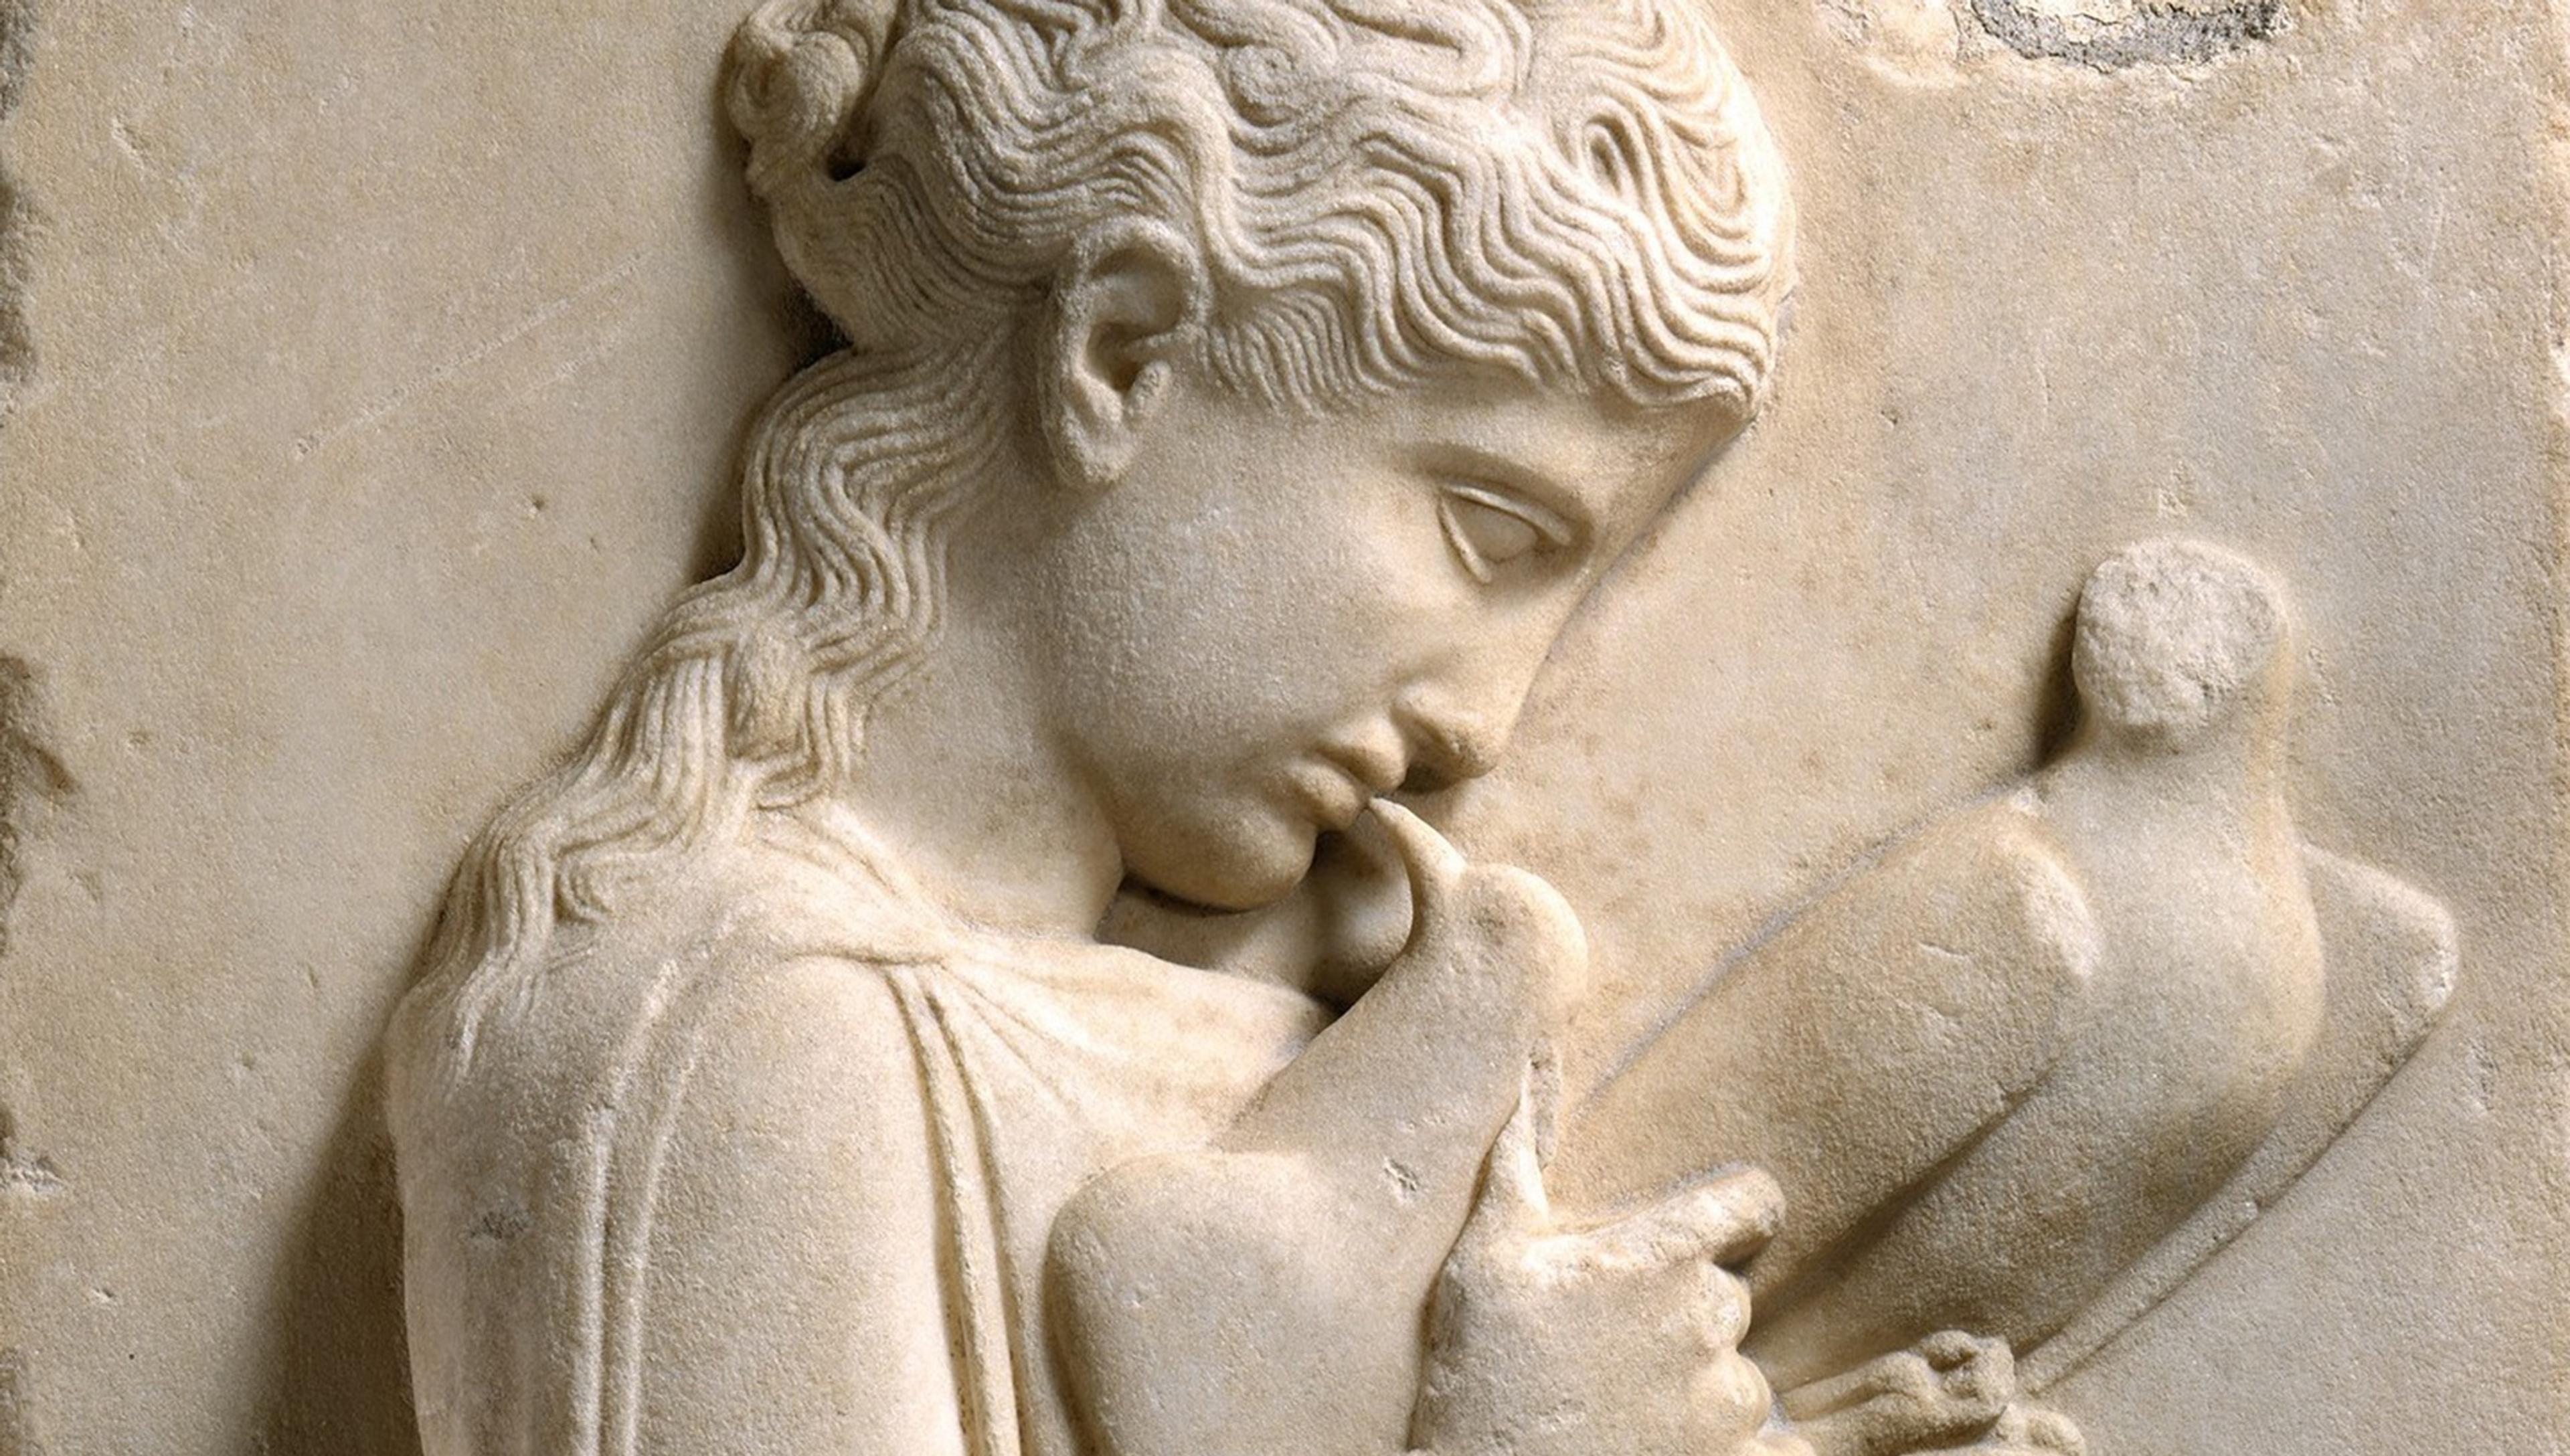 Ancient marble relief sculpture of a young girl holding a bird close to her face, with intricate detailing of her hair and clothing.